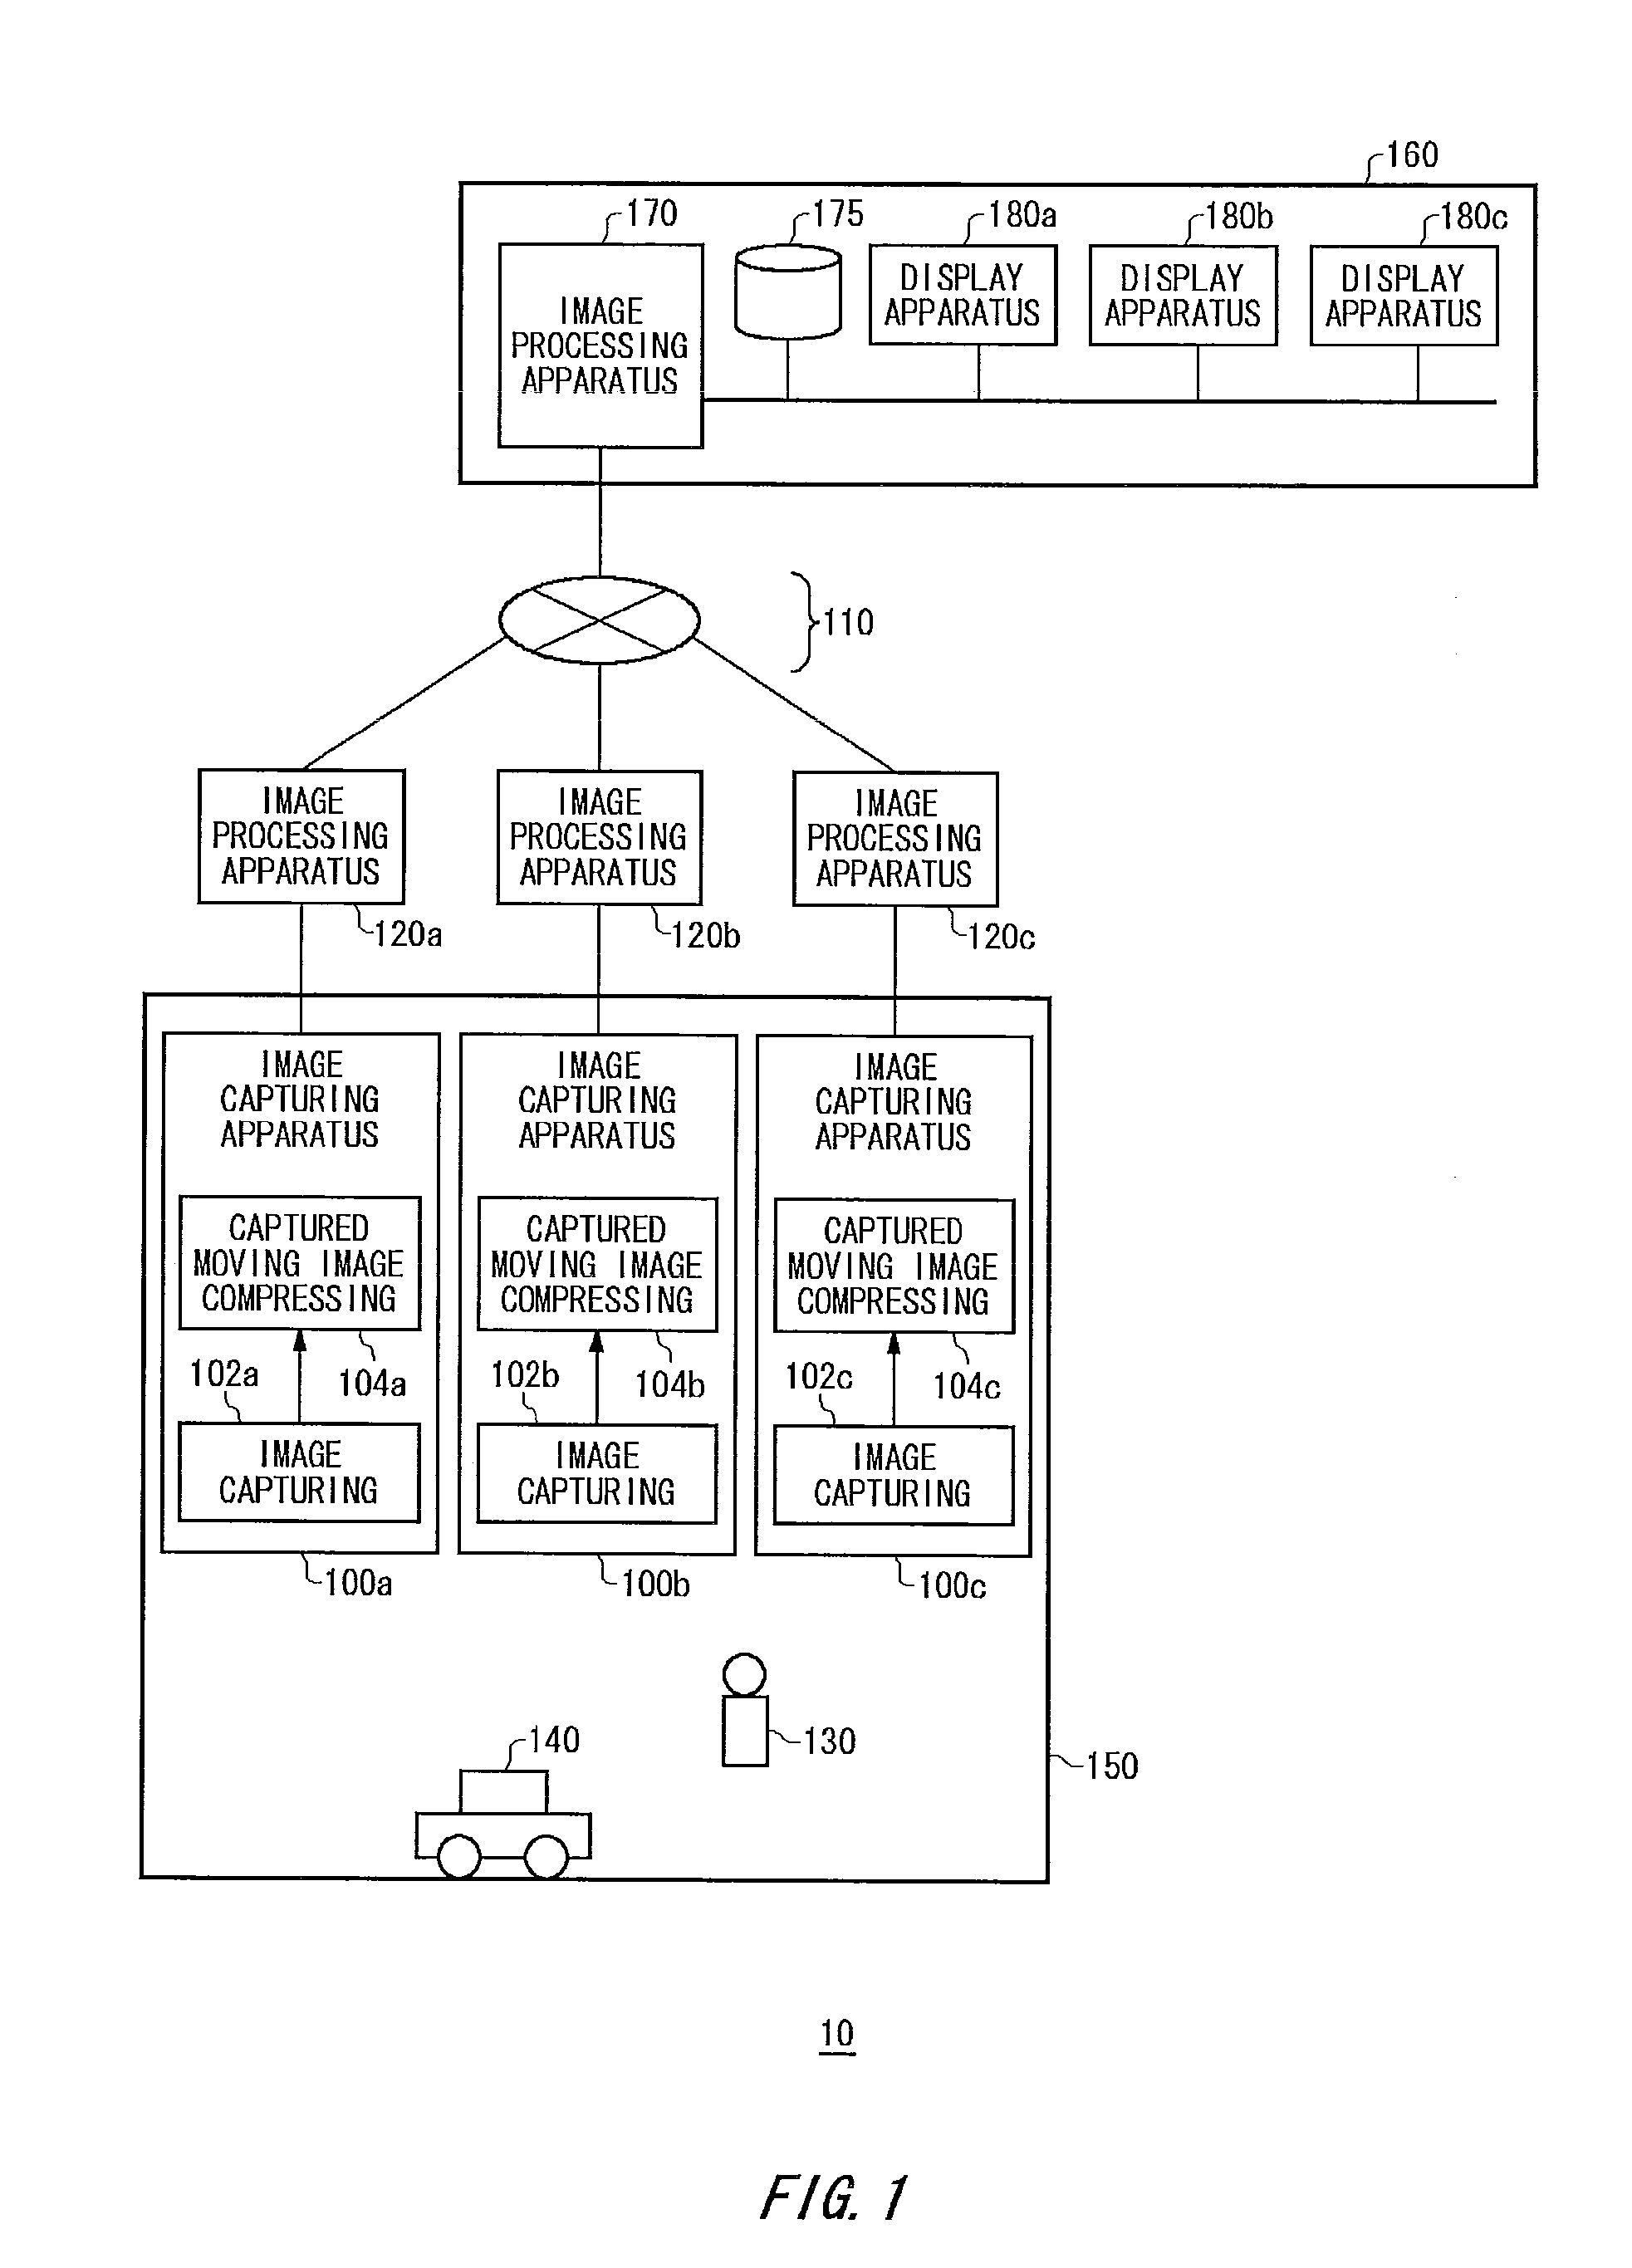 Image processing apparatus, image processing method, image processing system and computer readable medium